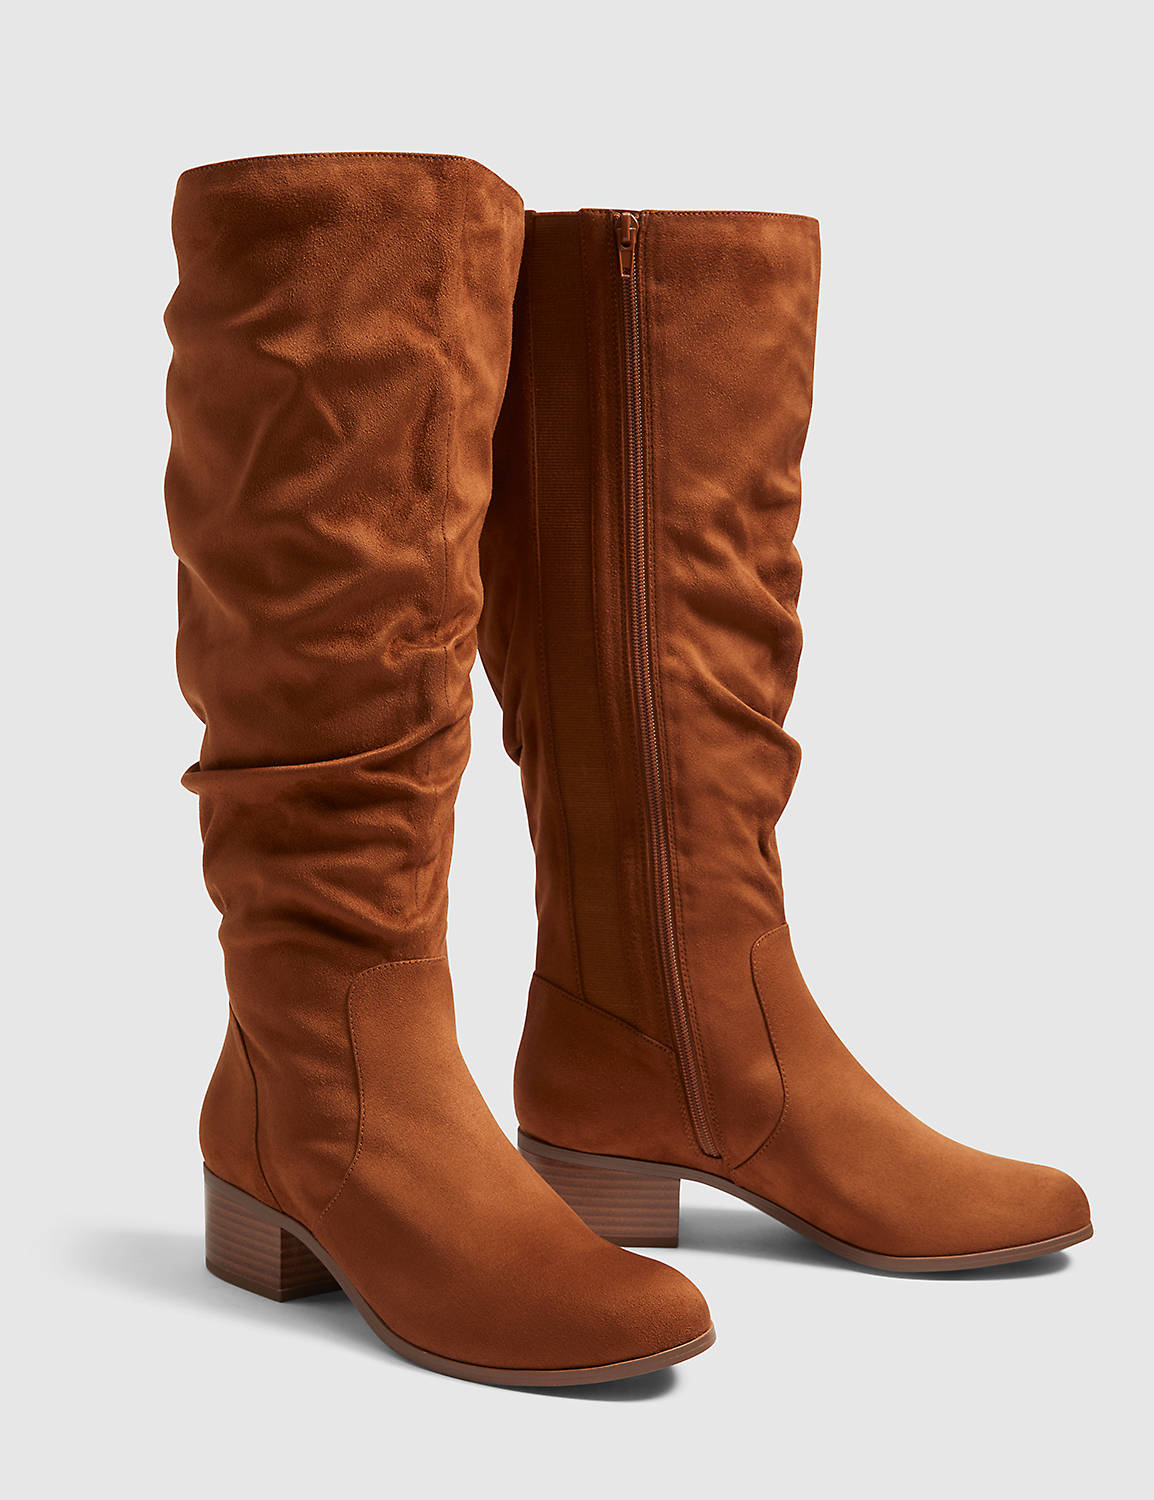 DREAM CLOUD Slouch Tall Boot Product Image 1